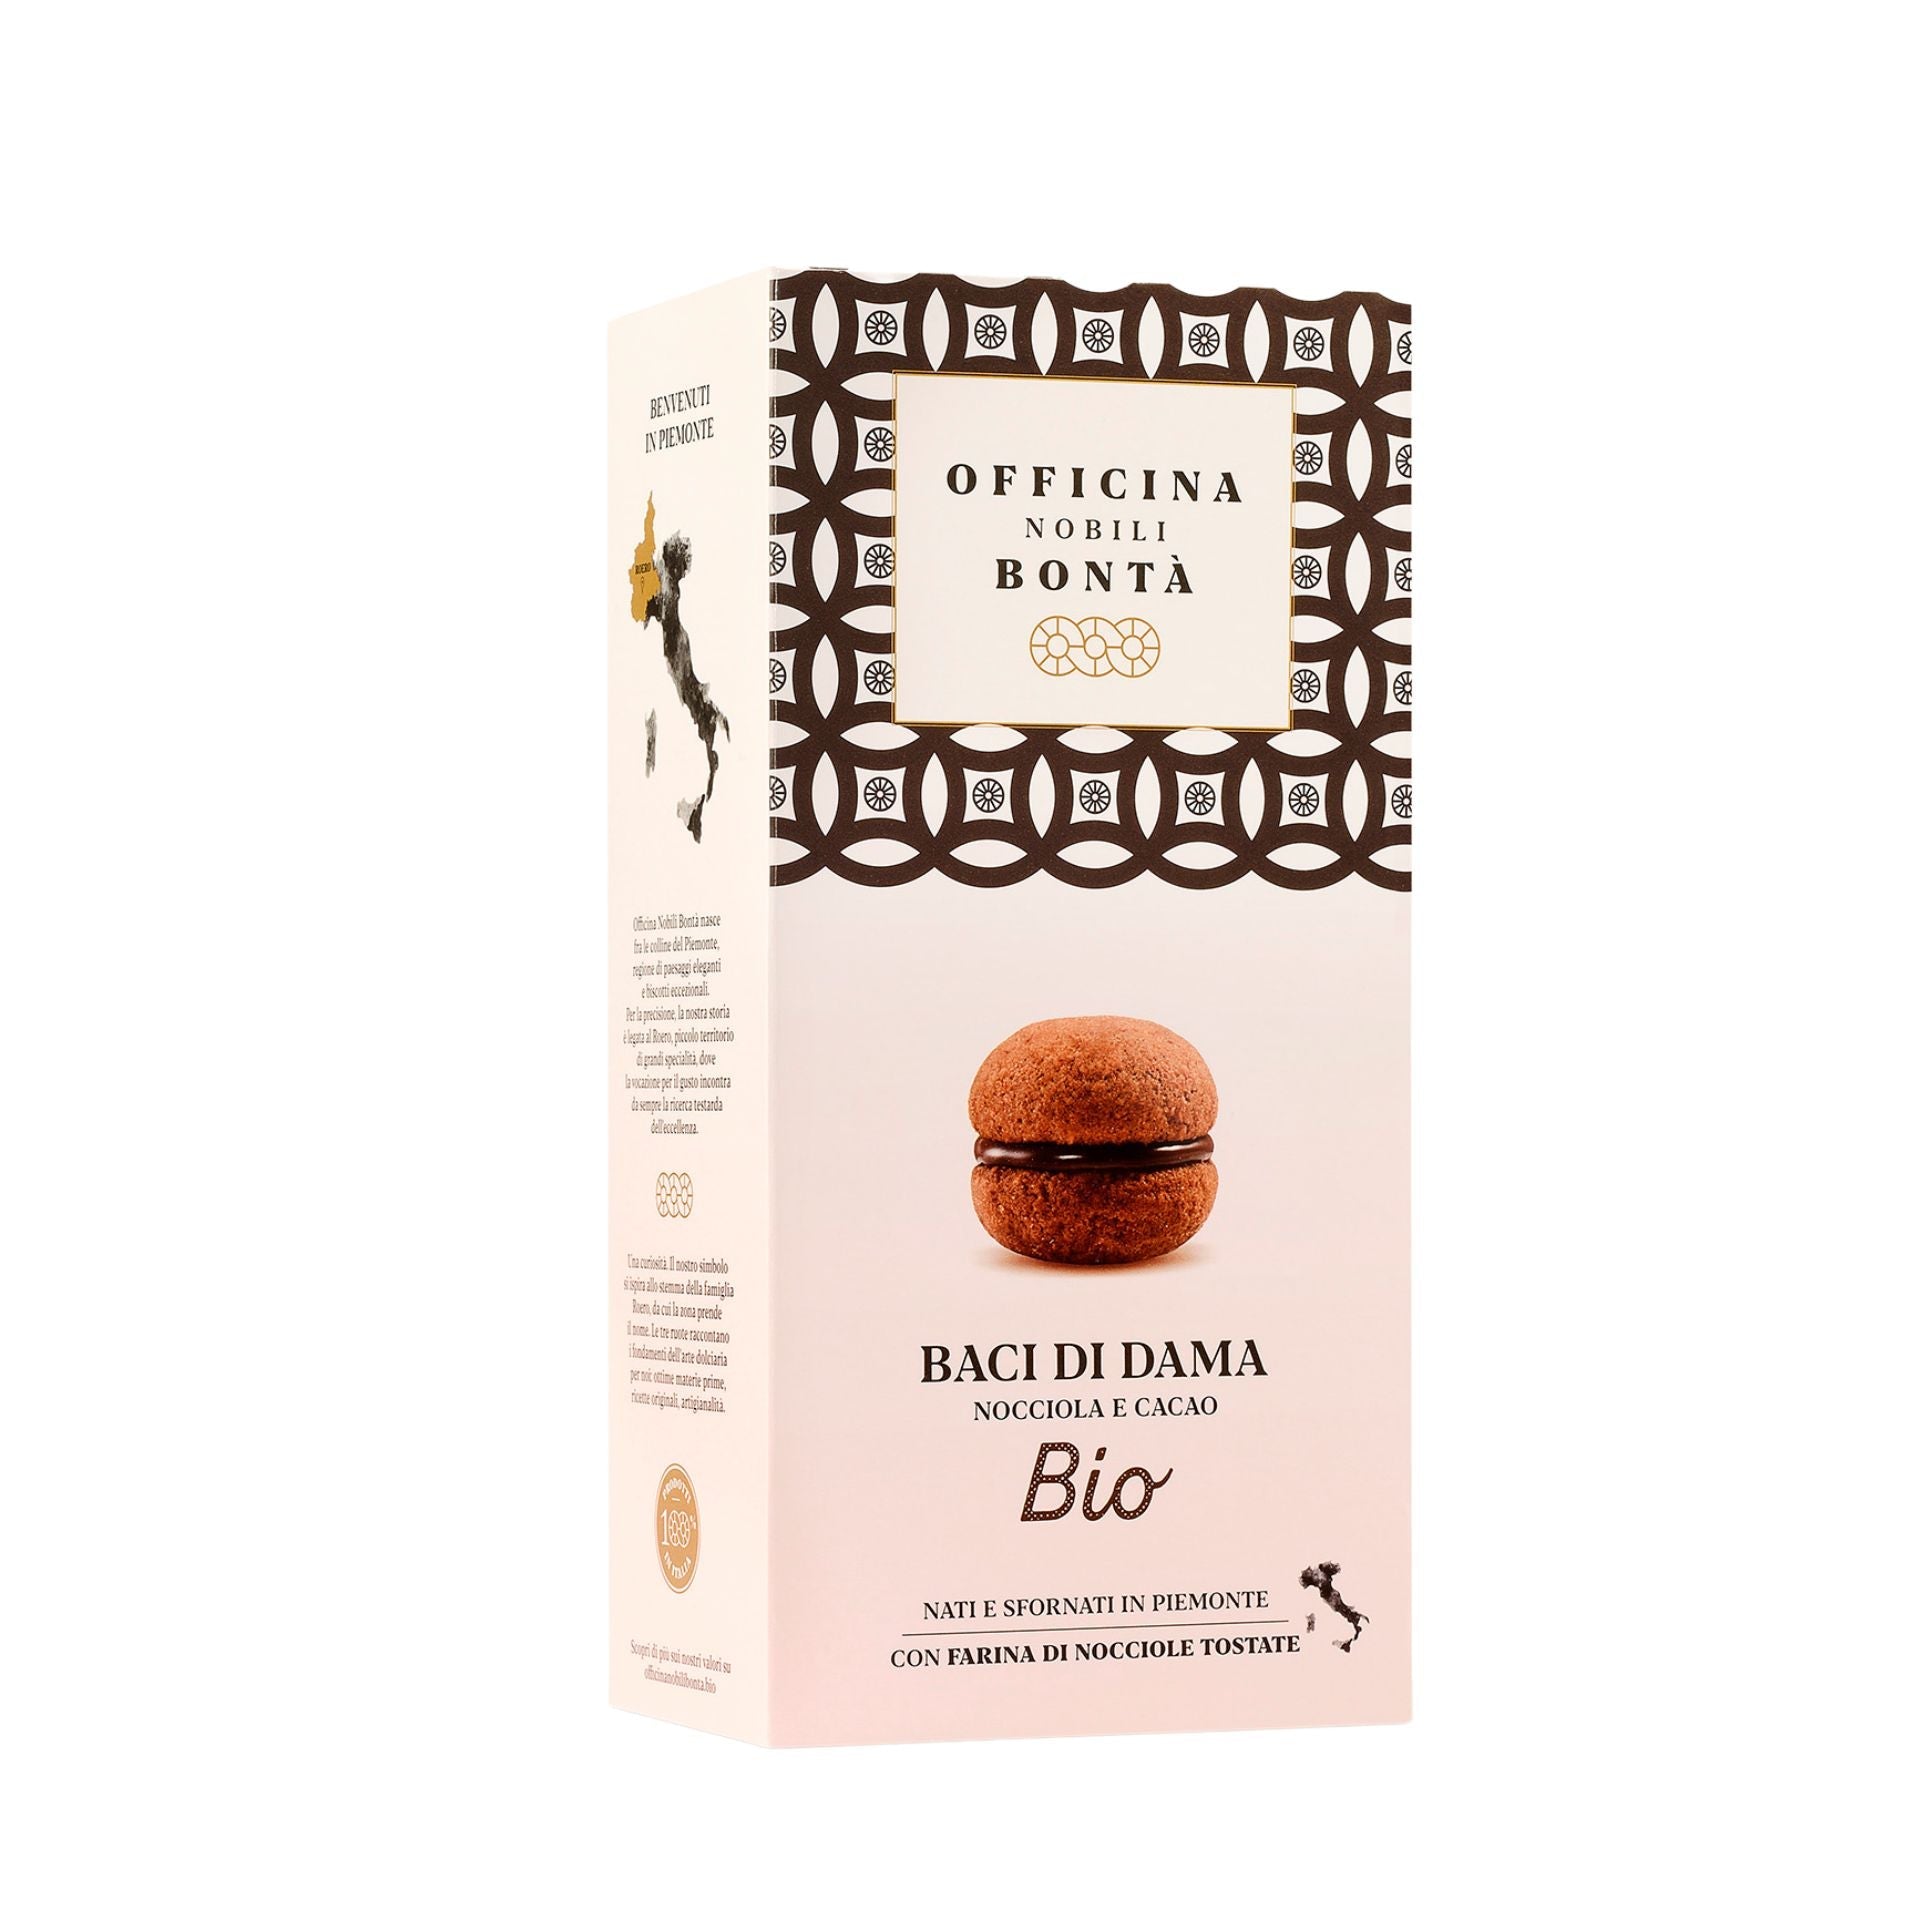 Officina Nobili Bonta Organic Hazelnut & Chocolate Baci di Dama Biscuit 180g (Box)  | Imported and distributed in the UK by Just Gourmet Foods